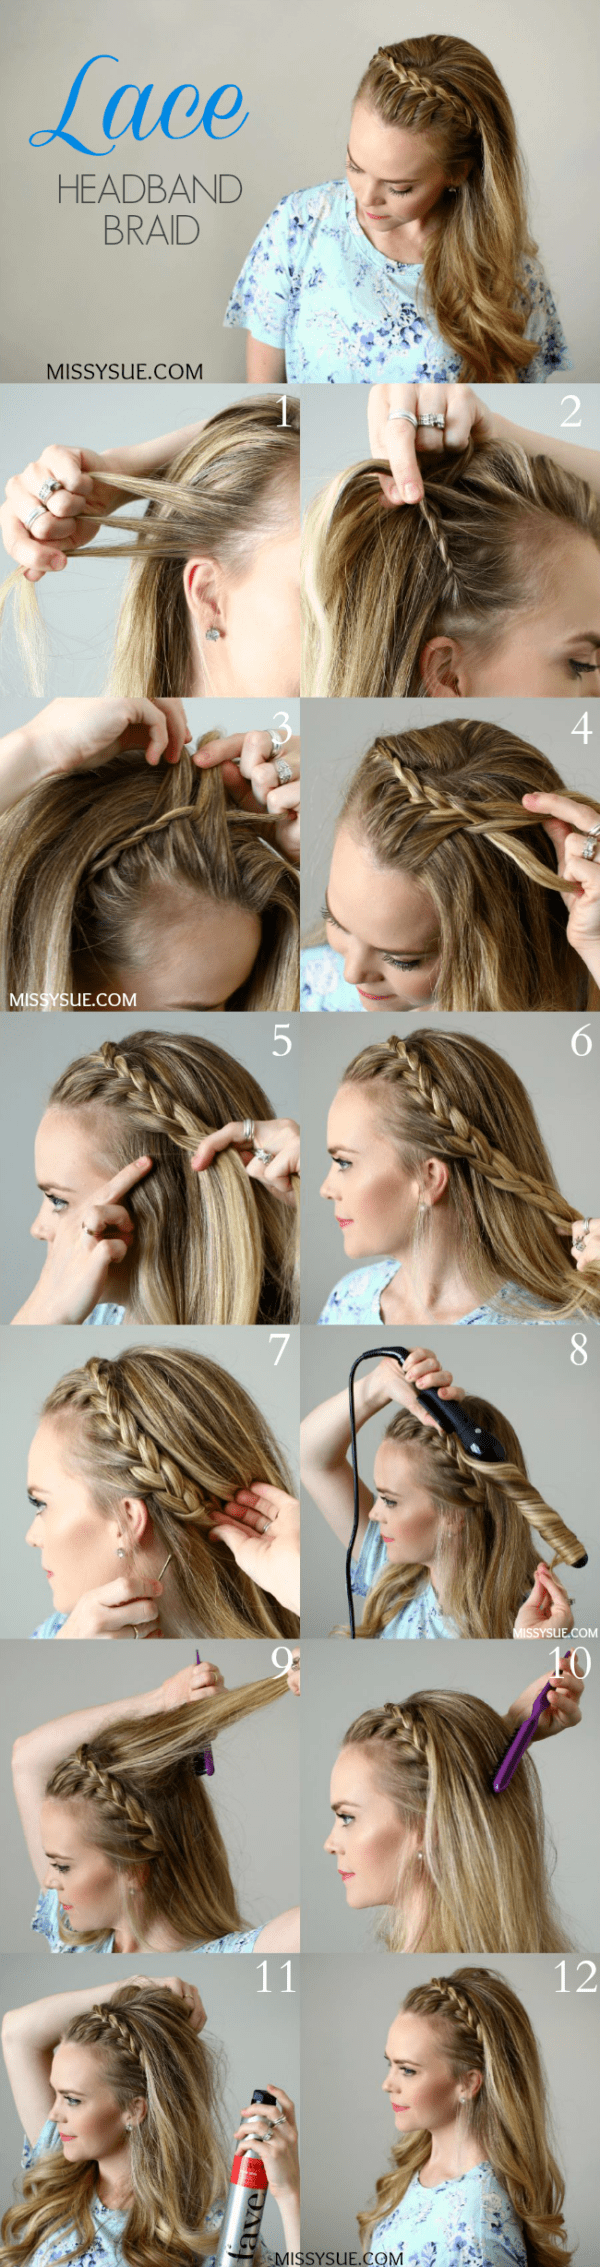 9 Easy DIY Hairstyles Tutorials For Stunning Looks